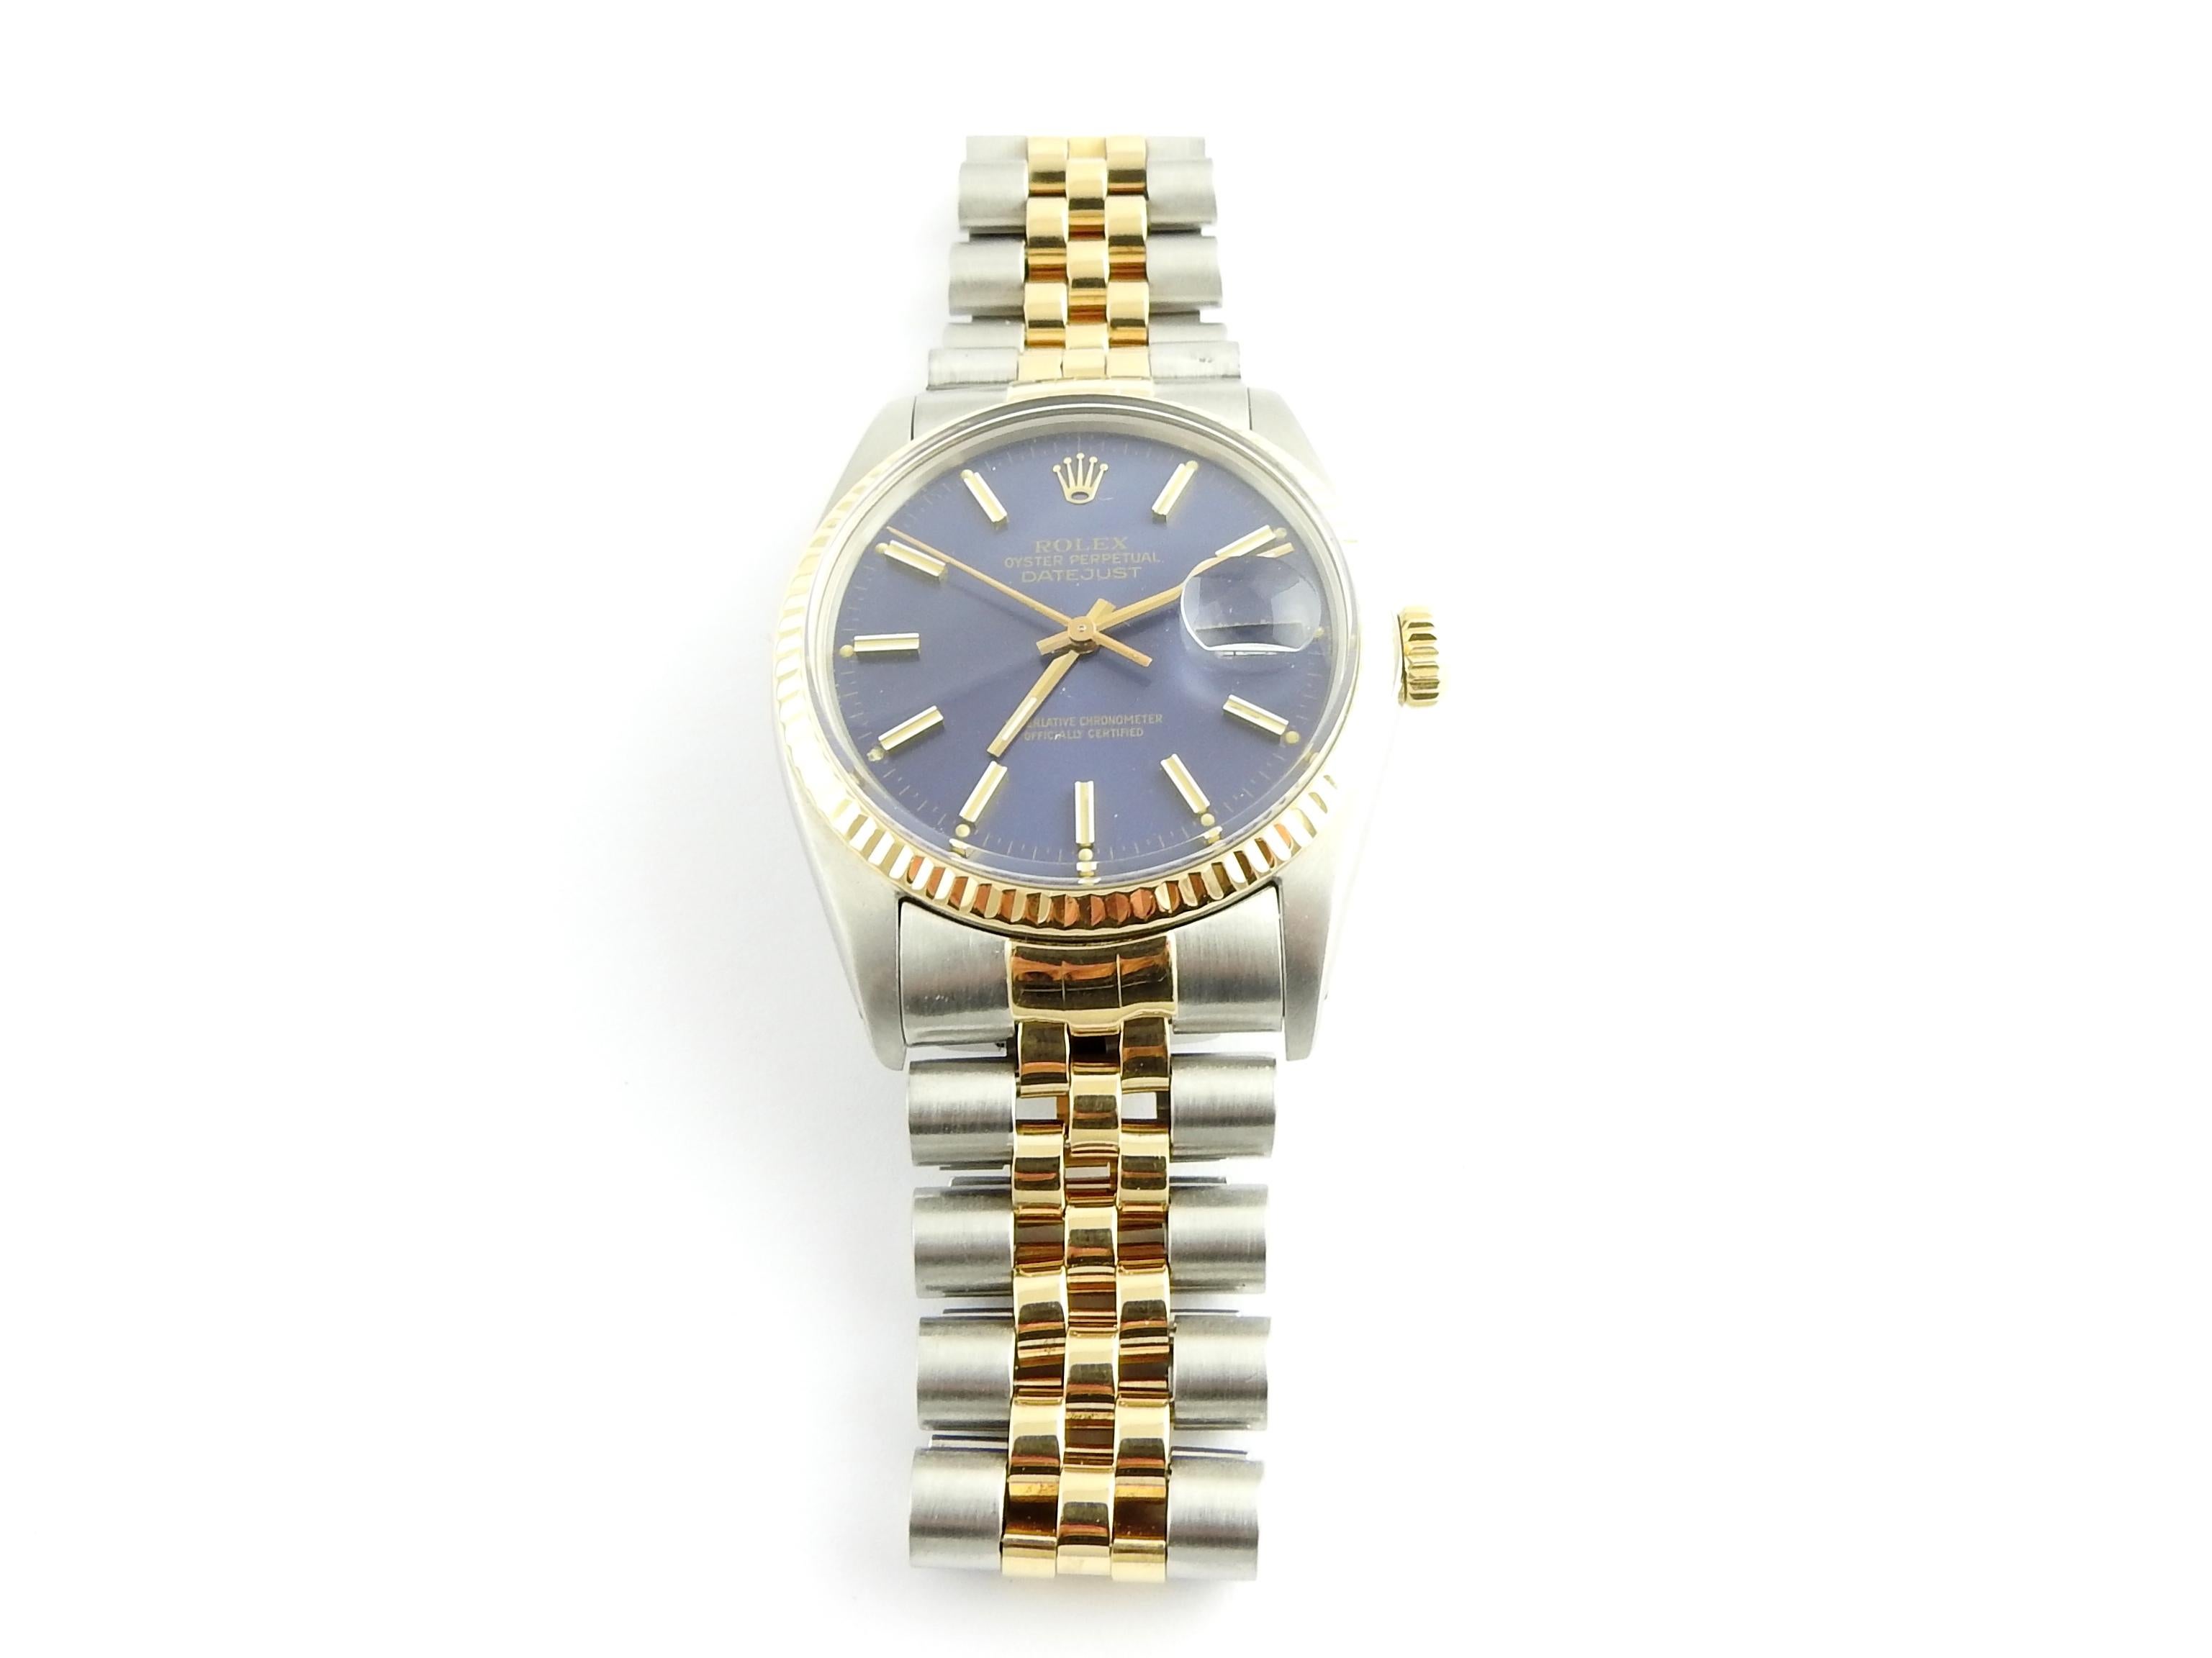 1986 Rolex Men's Watch

Model: 16013

Serial: 9007376

This authentic Rolex Oyster Perpetual Date Just Watch has a 36mm case

Automatic movement

Blue Dial with gold markers

18K Yellow Gold Bezel

Stainless and yellow gold band. Some stretch to